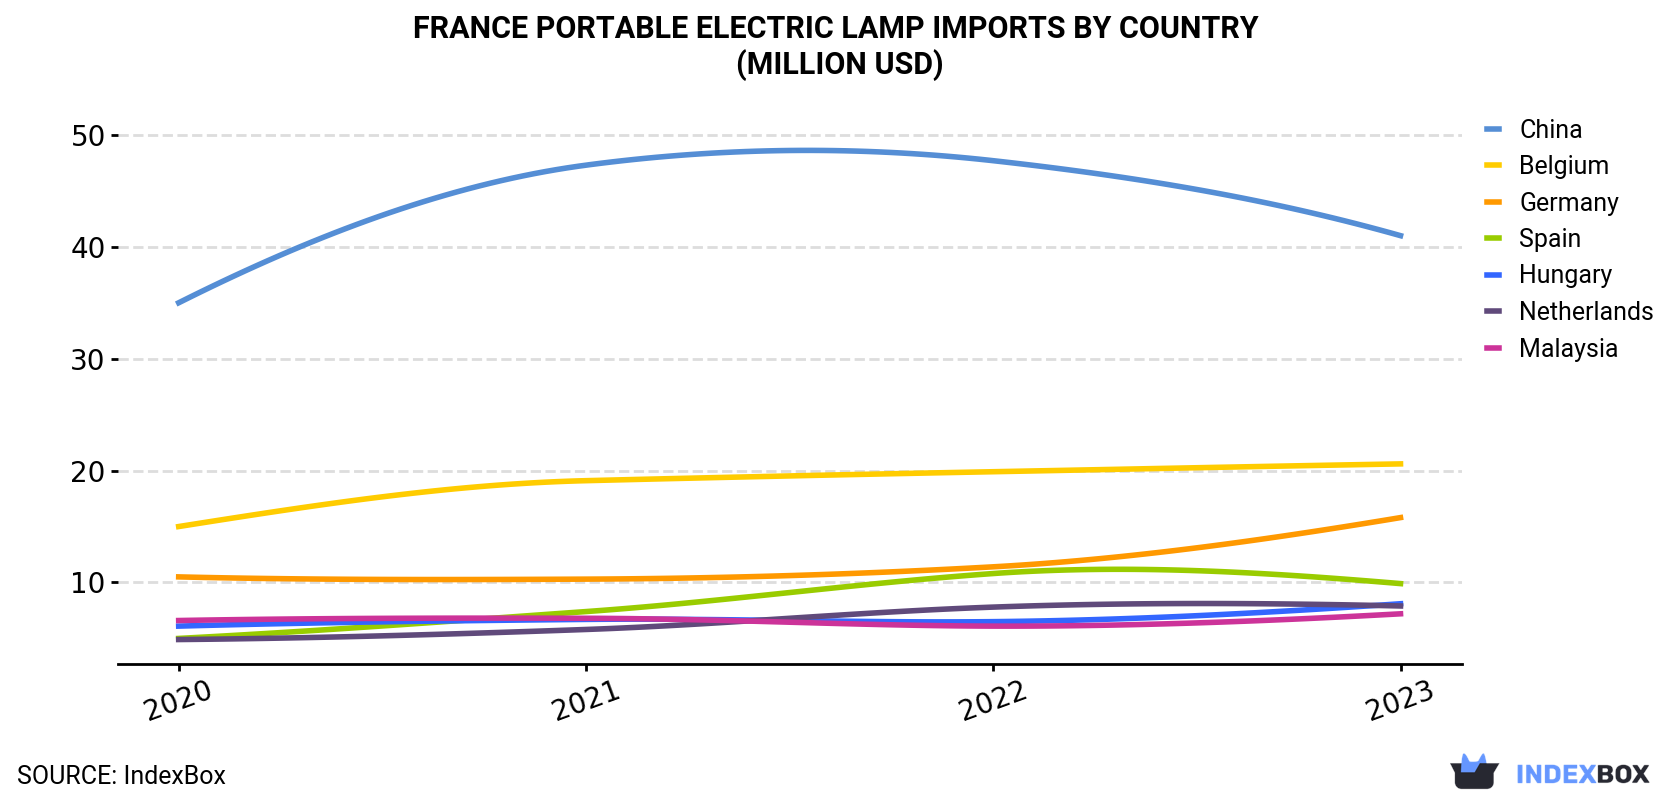 France Portable Electric Lamp Imports By Country (Million USD)